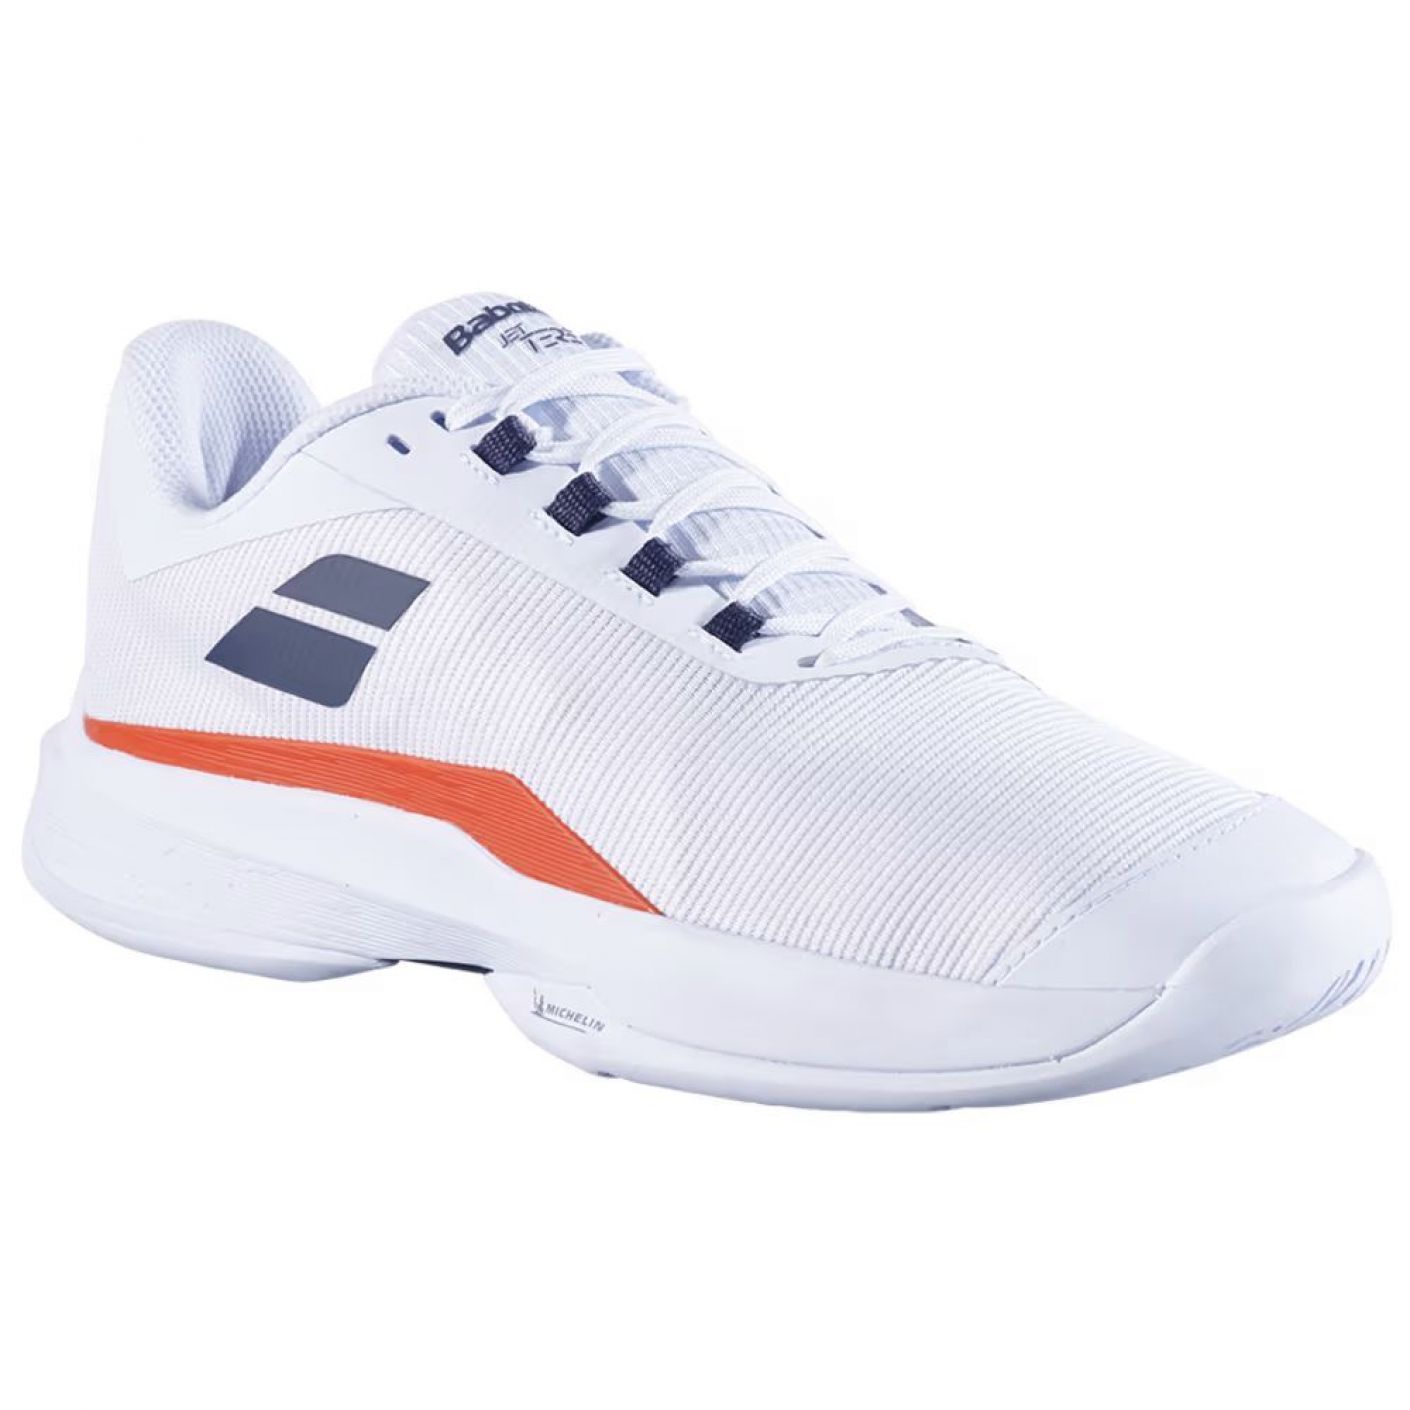 Babolat - Jet tere 2 all court #1089 30S24649